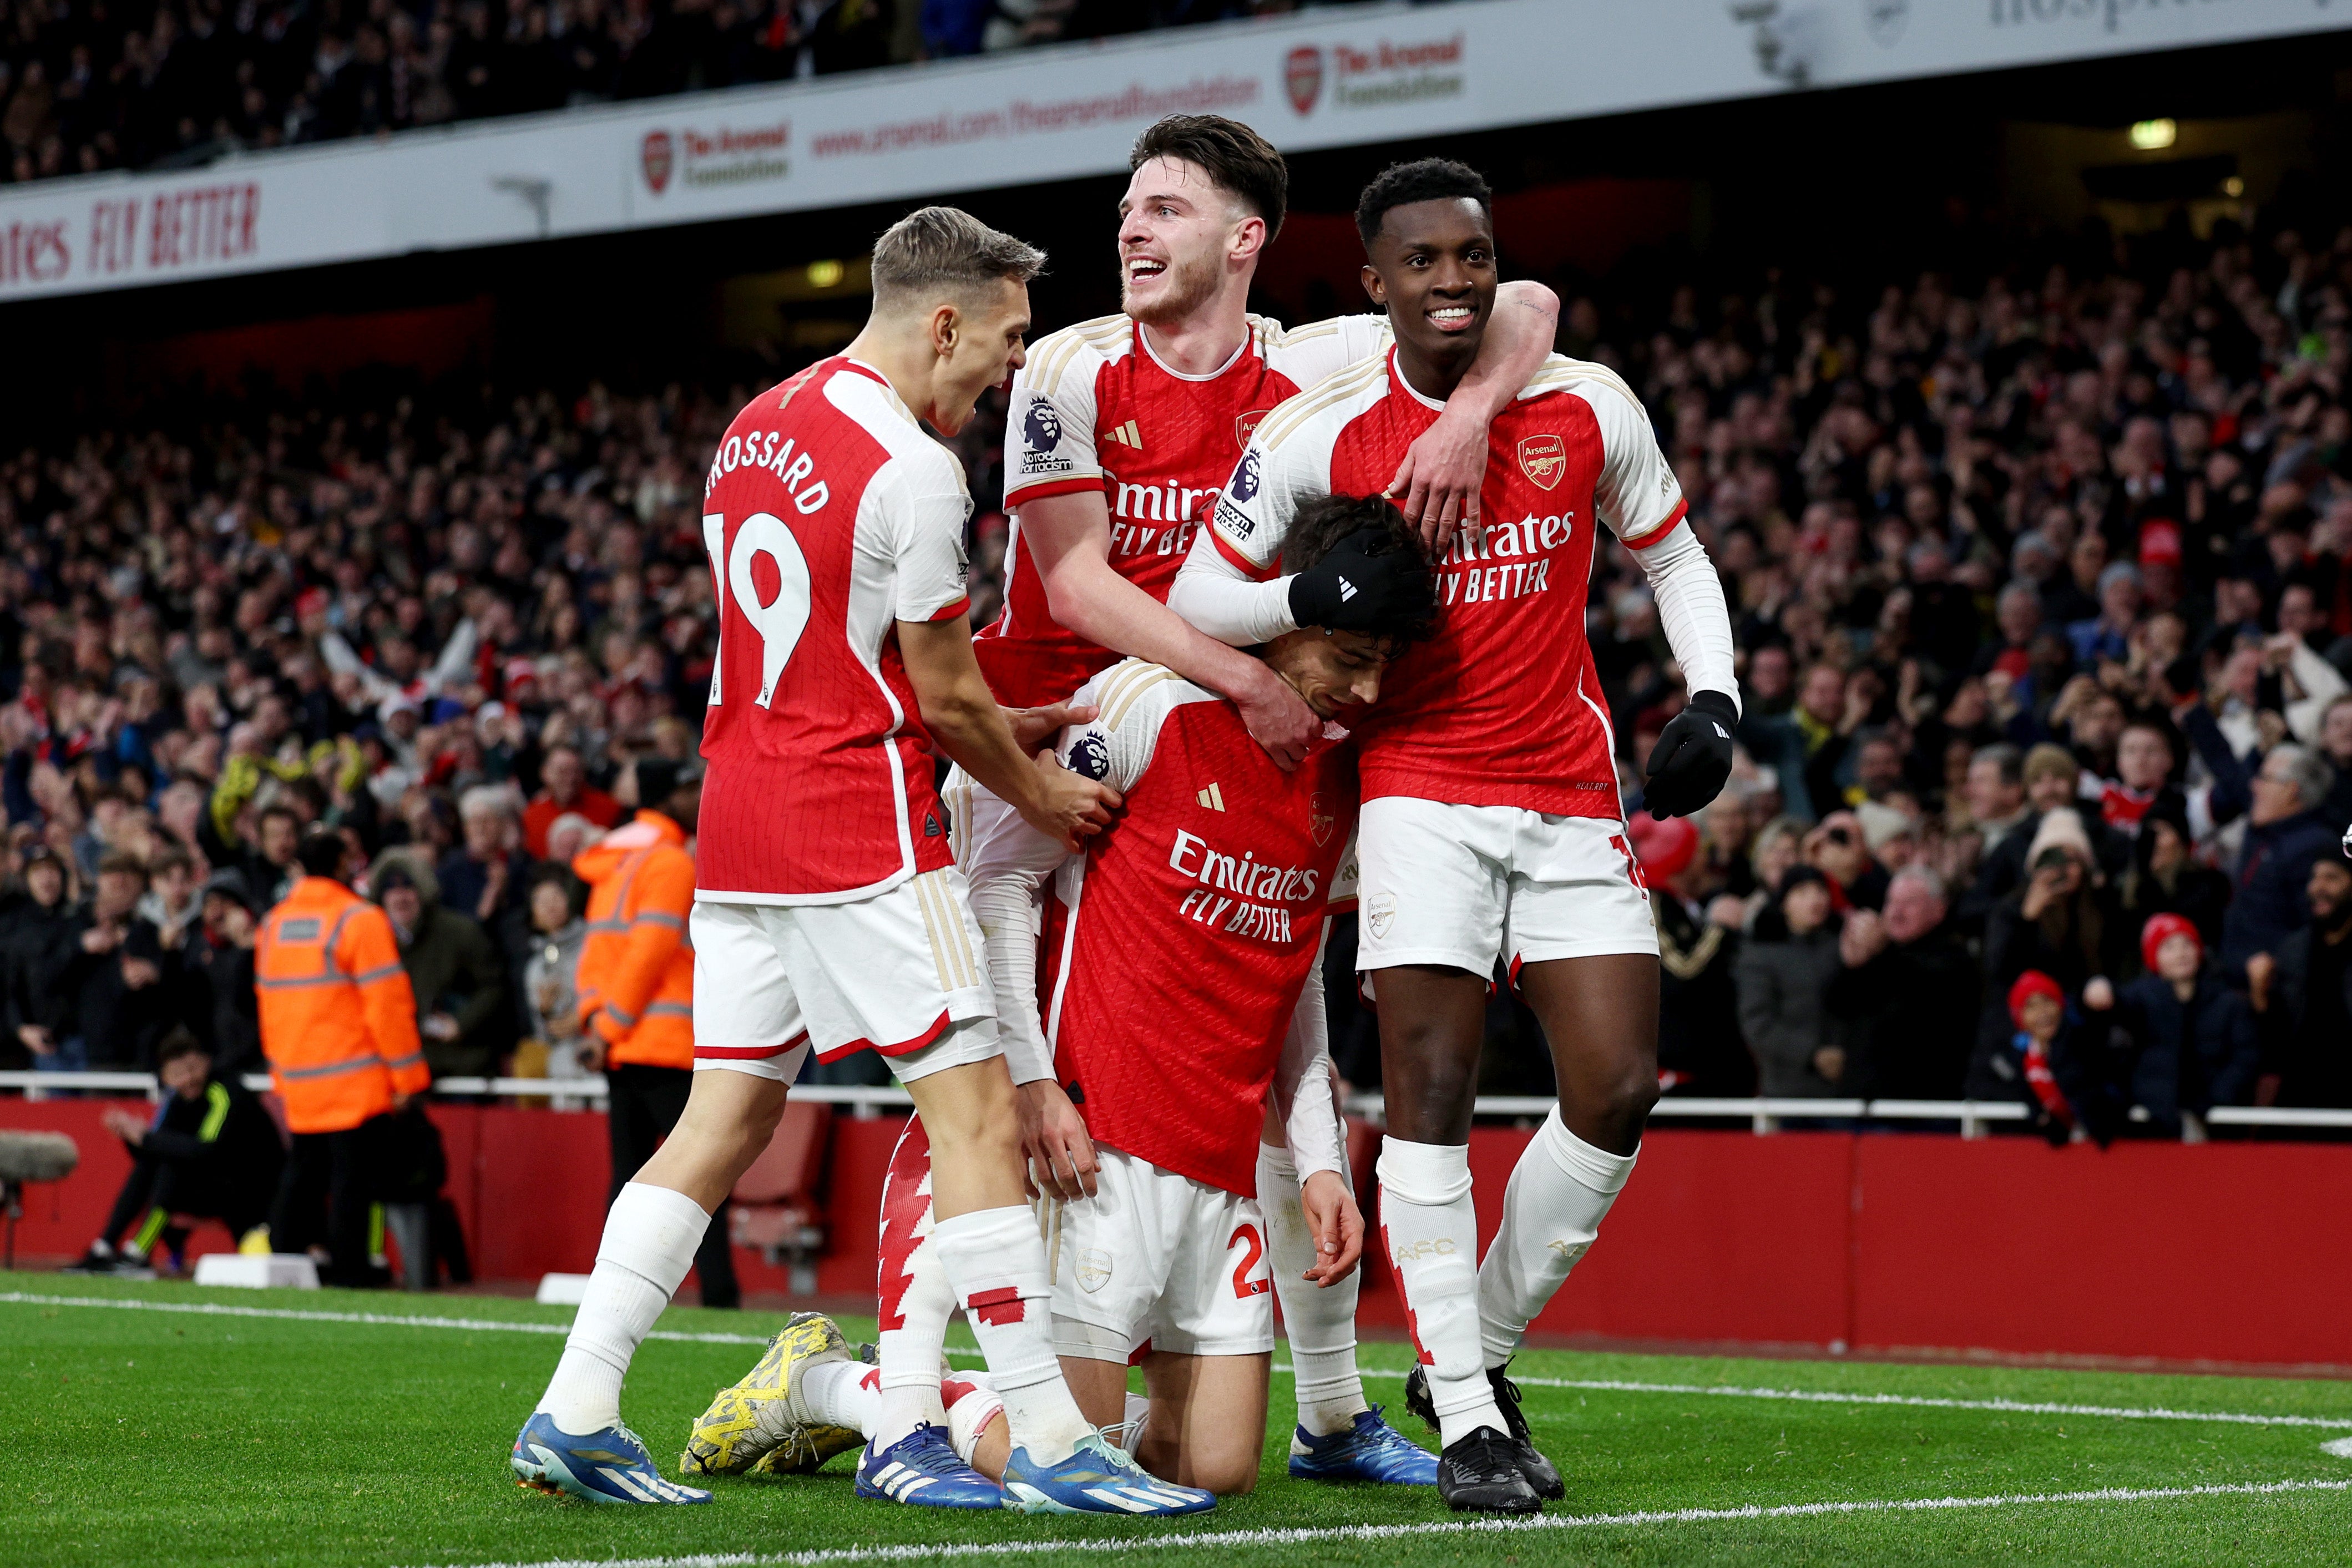 Havertz wrapped up victory for Arsenal